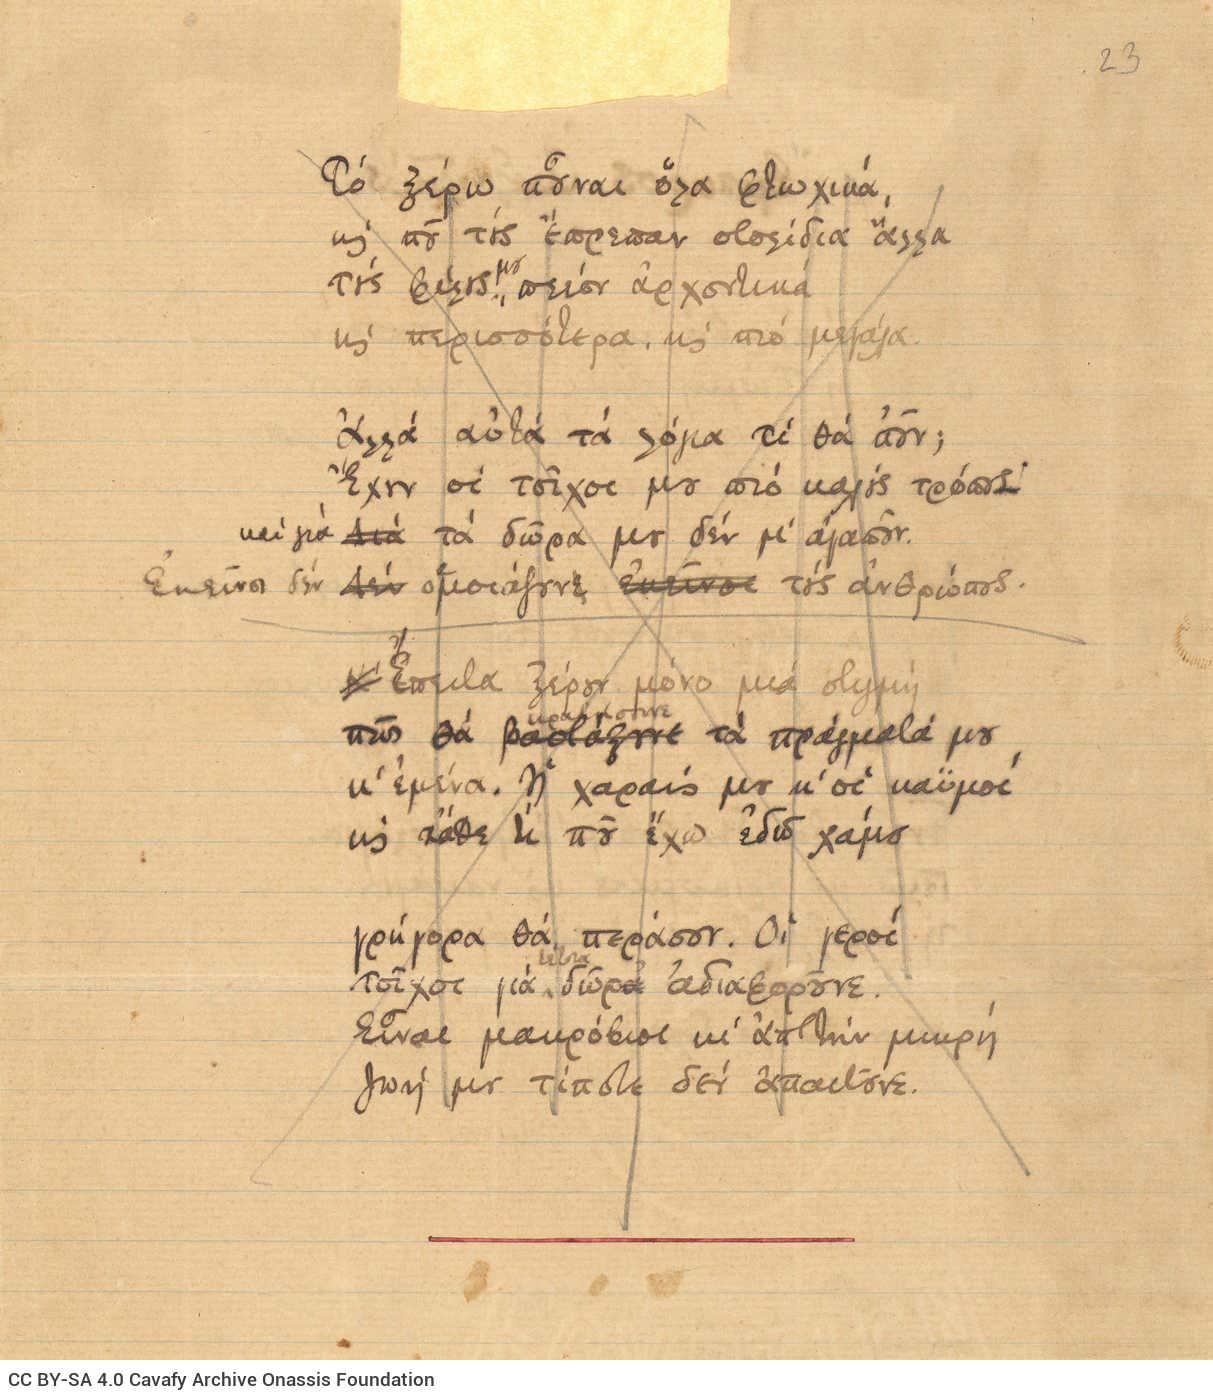 Two ruled sheets, initially affixed together. On one side of the first sheet, manuscript of the poem "In the Cemetery", no